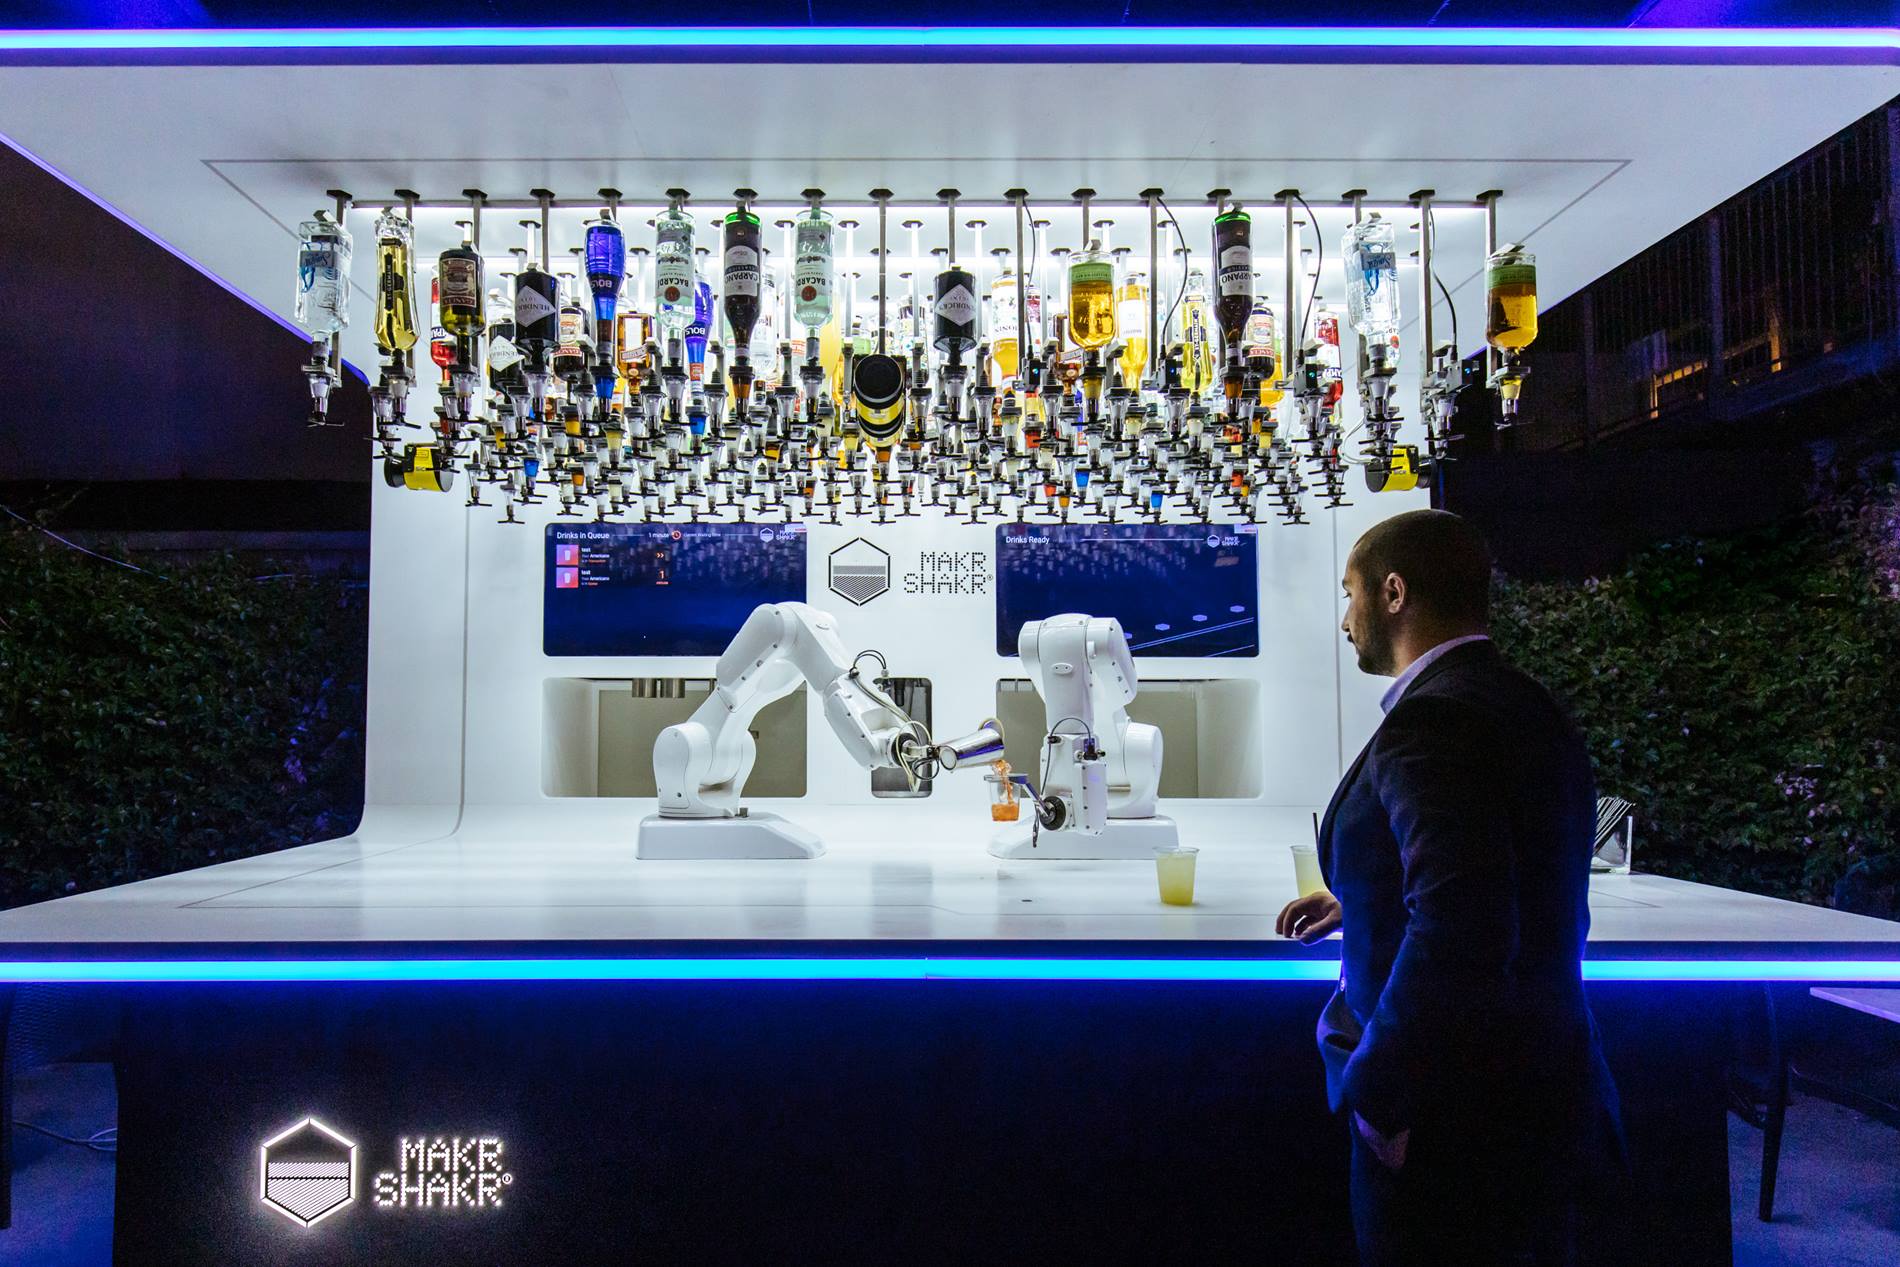 Two KUKA robots mix a cocktail together at a bar counter.